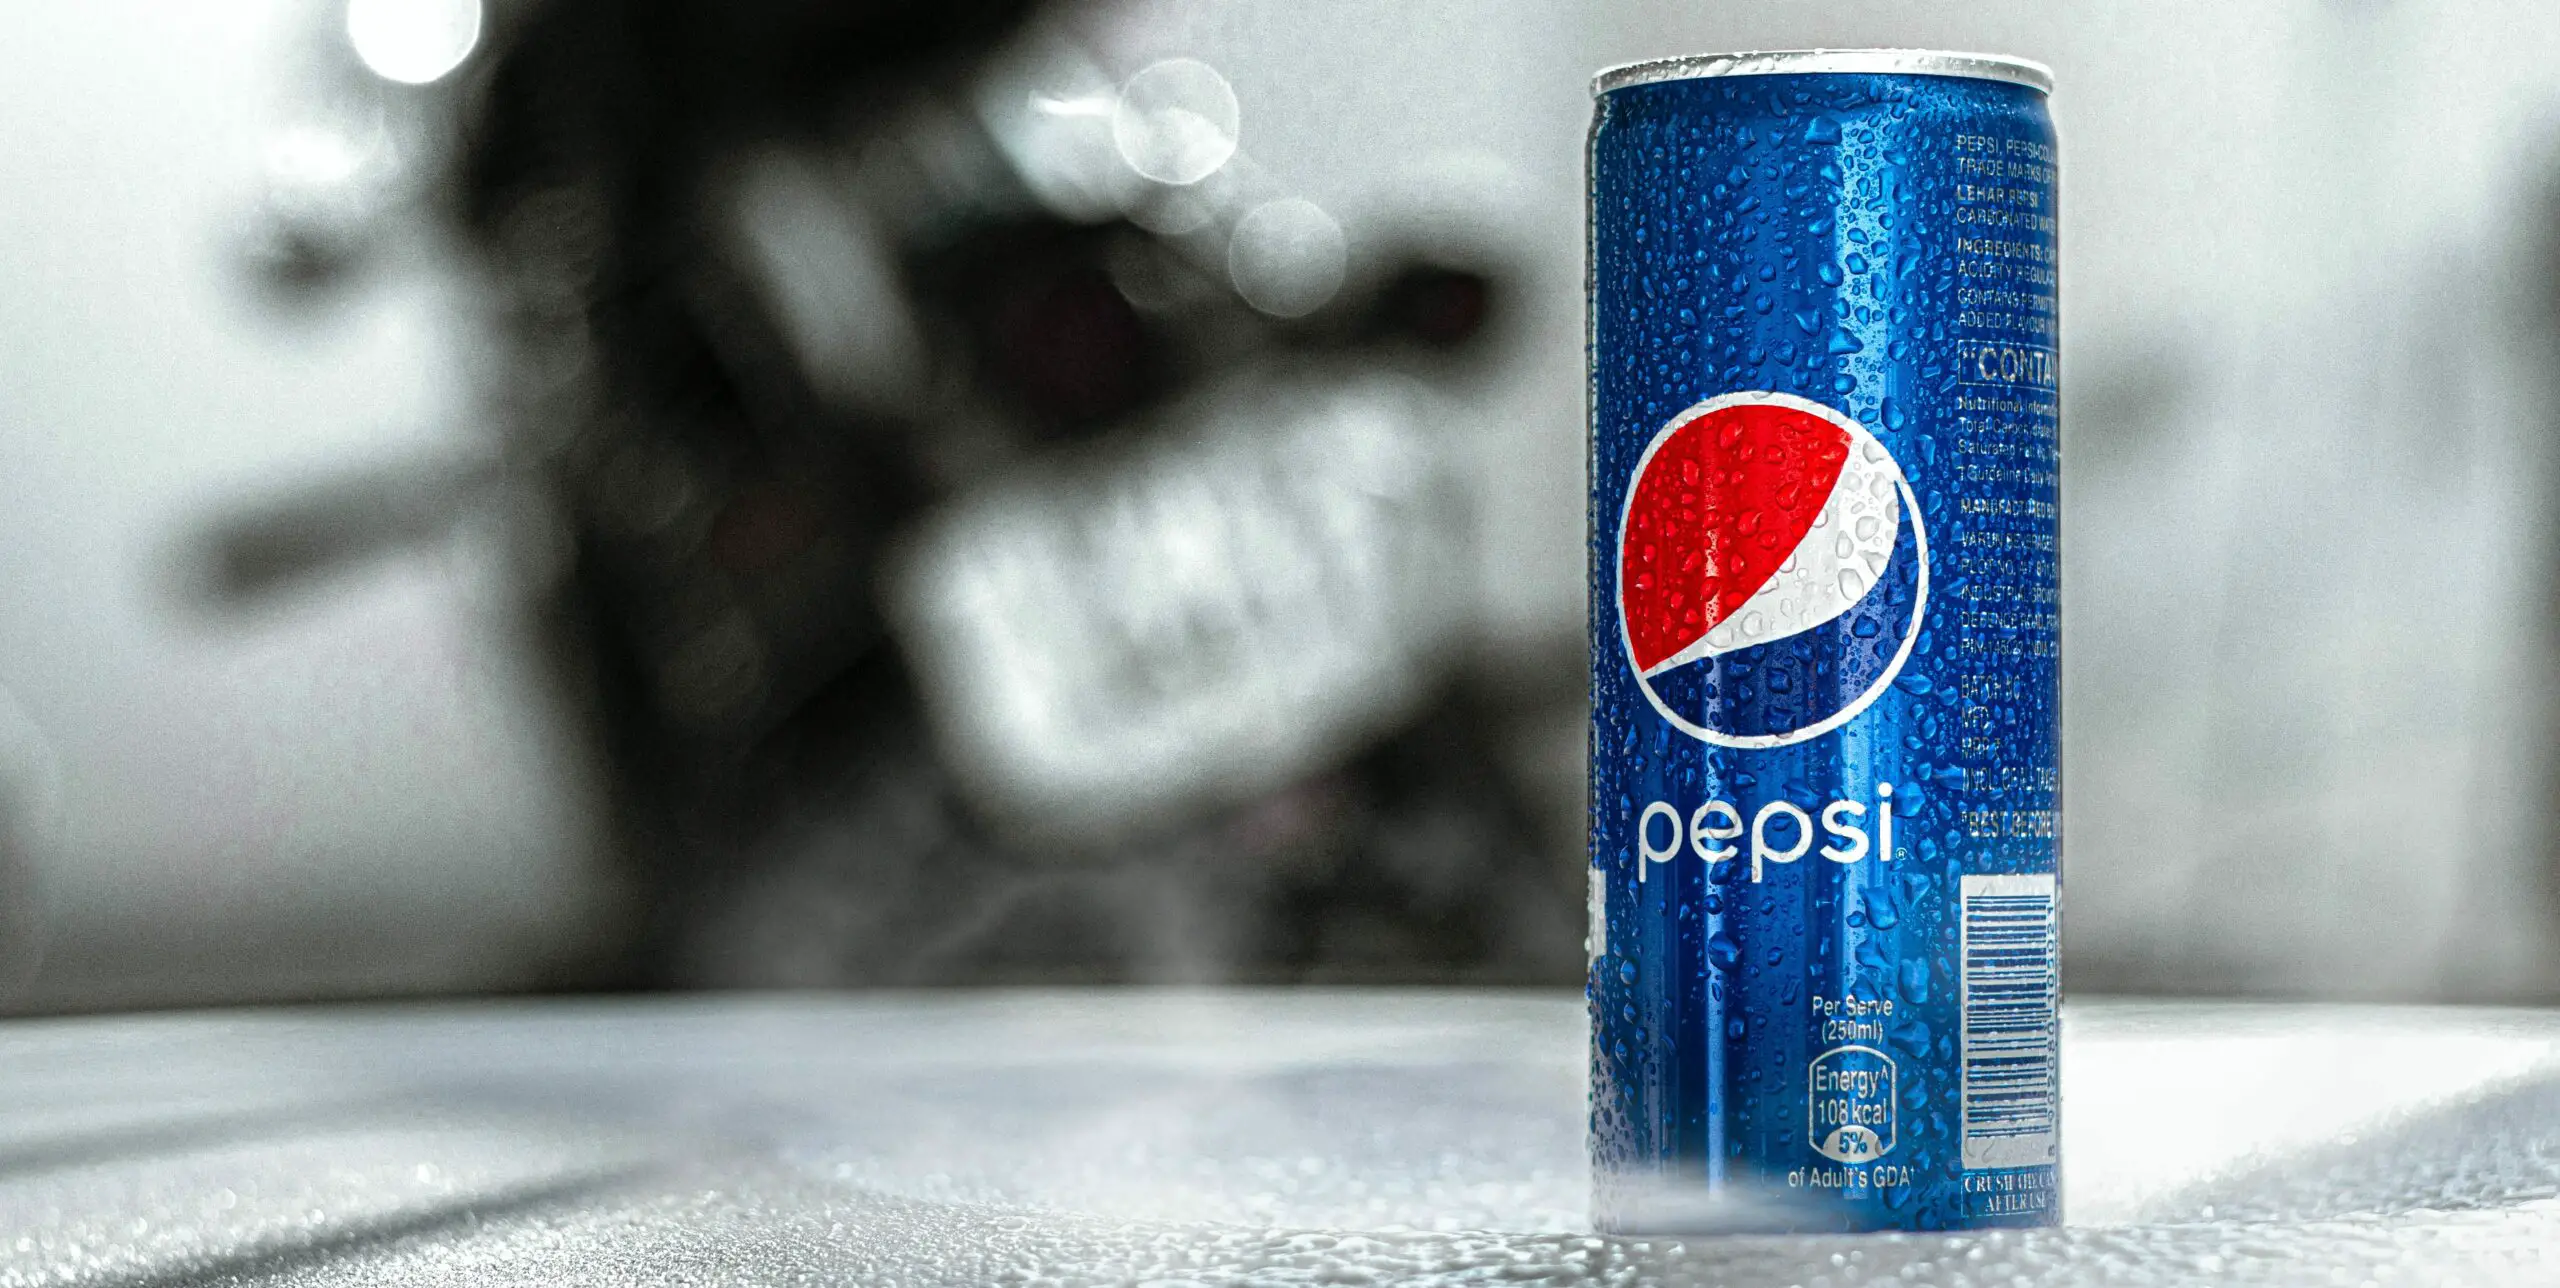 Is Pepsi A Good Company To Work For?